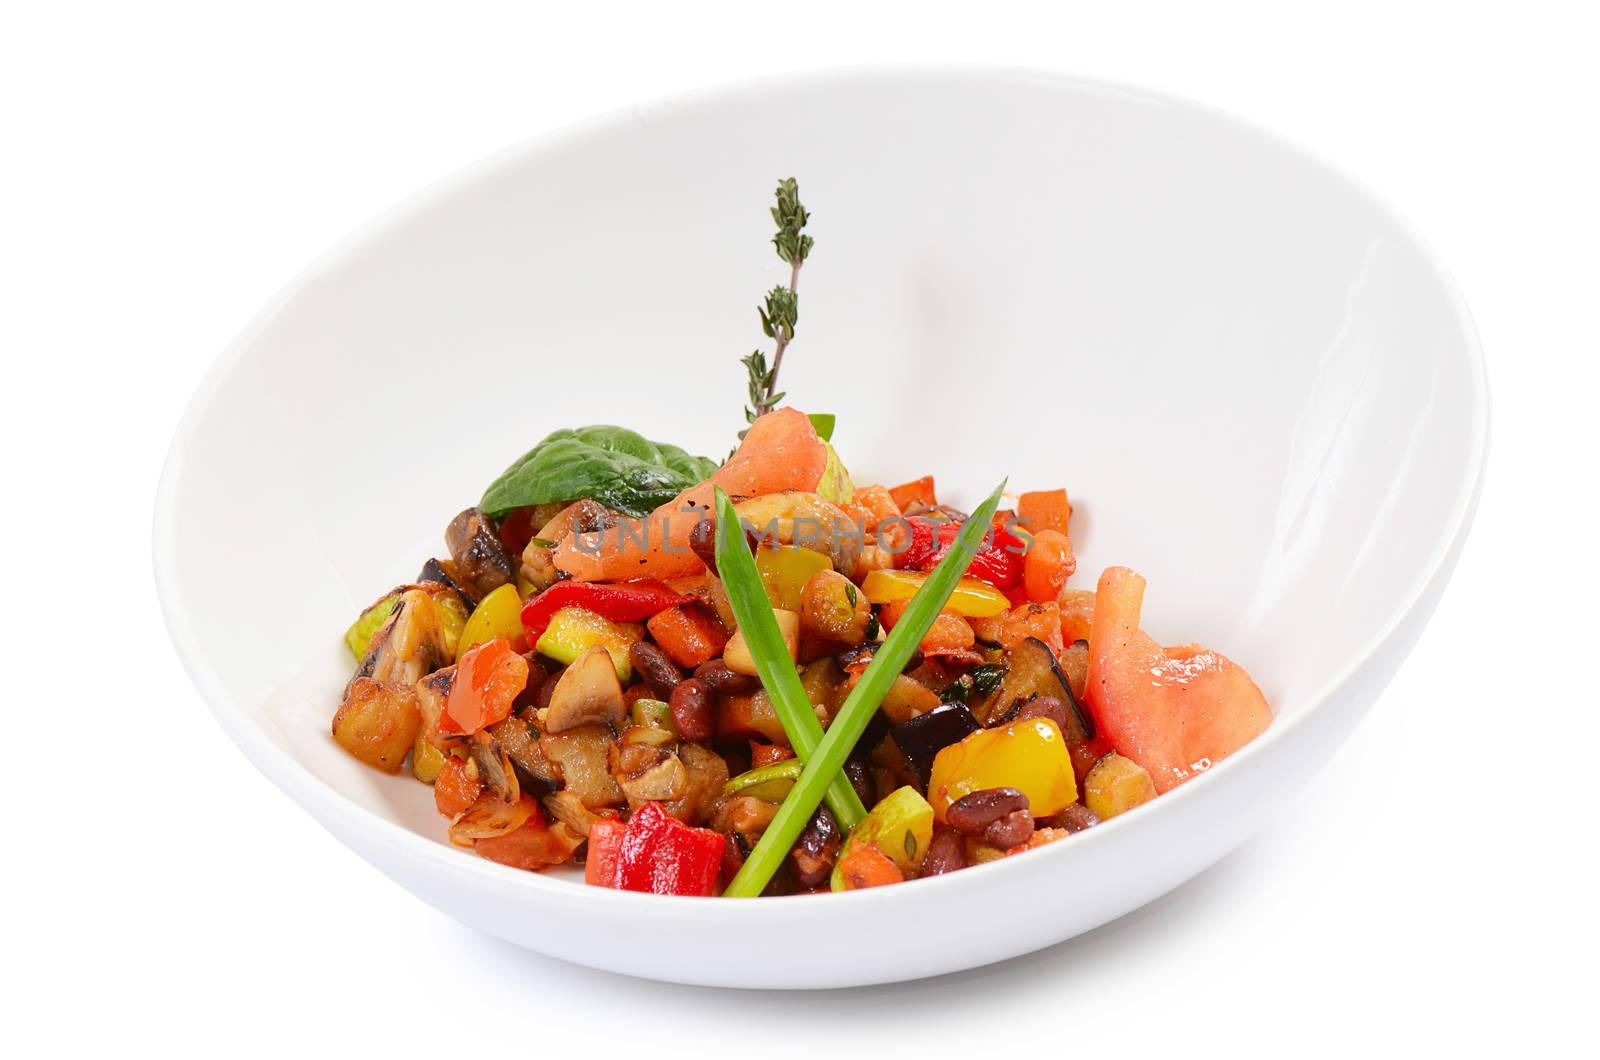 Ratatouille from vegetables by SvetaVo